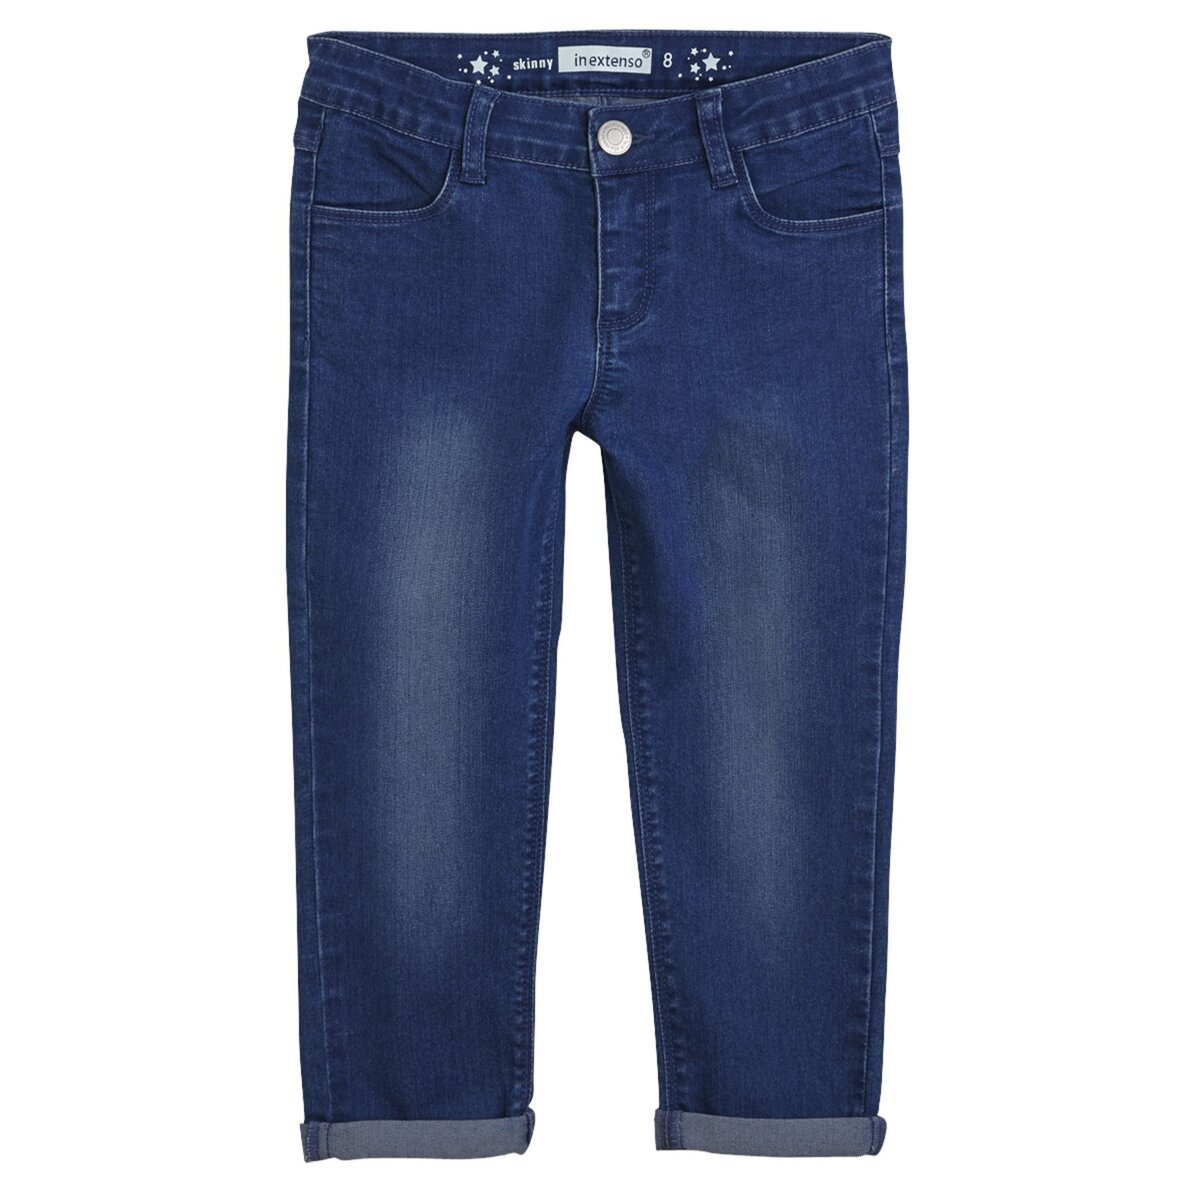 IN EXTENSO Pantacourt jean  Fille 